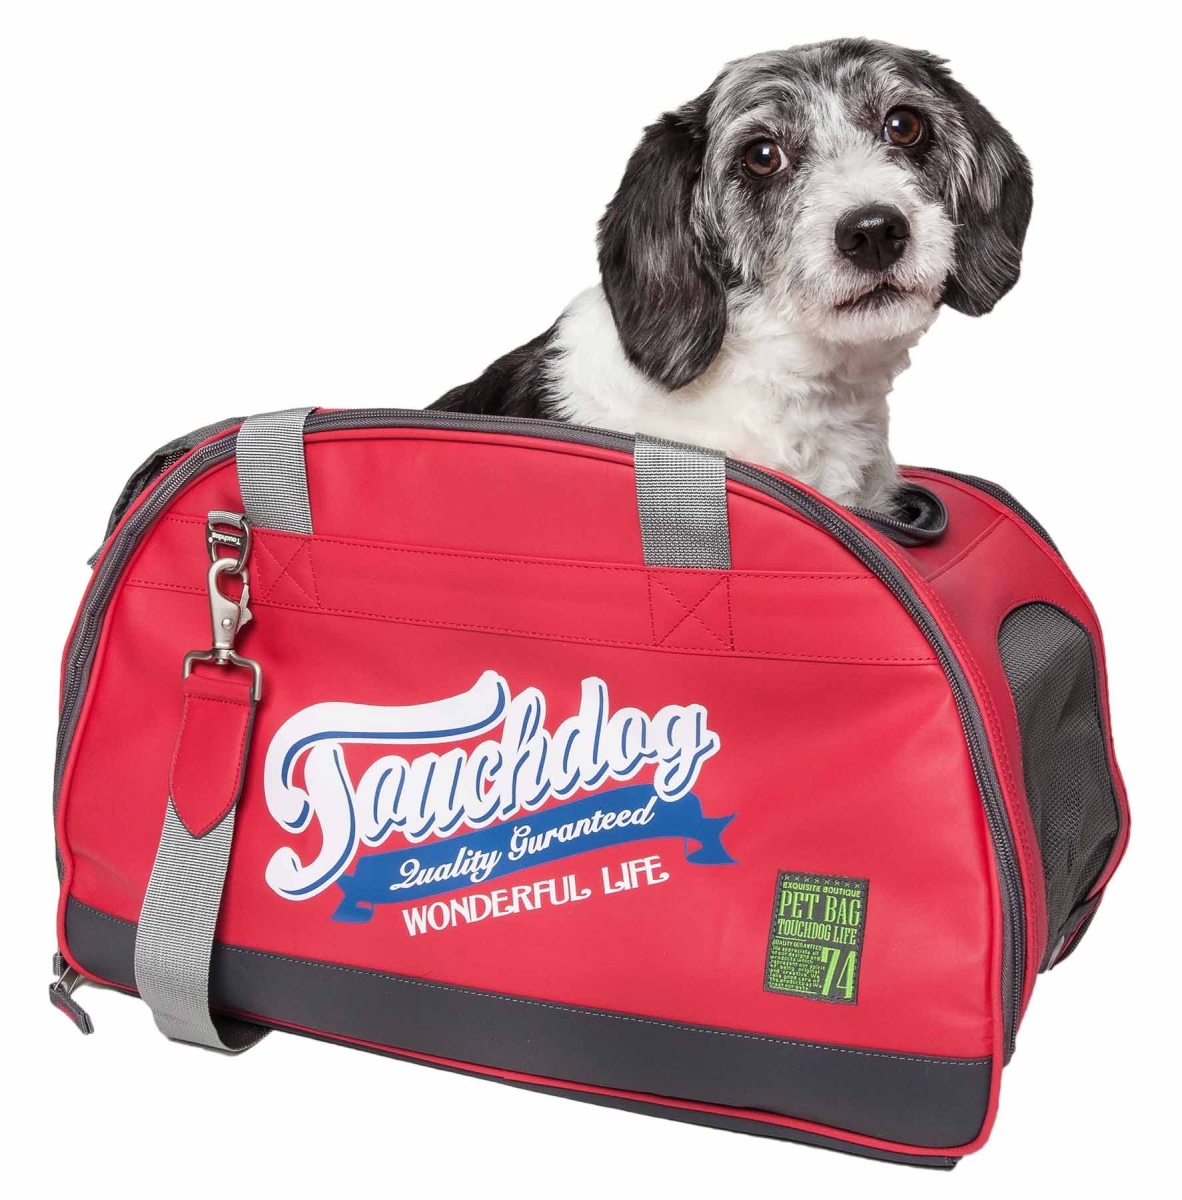 B80rdlg Original Wick-guard Water Resistant Fashion Pet Carrier, Red - One Size